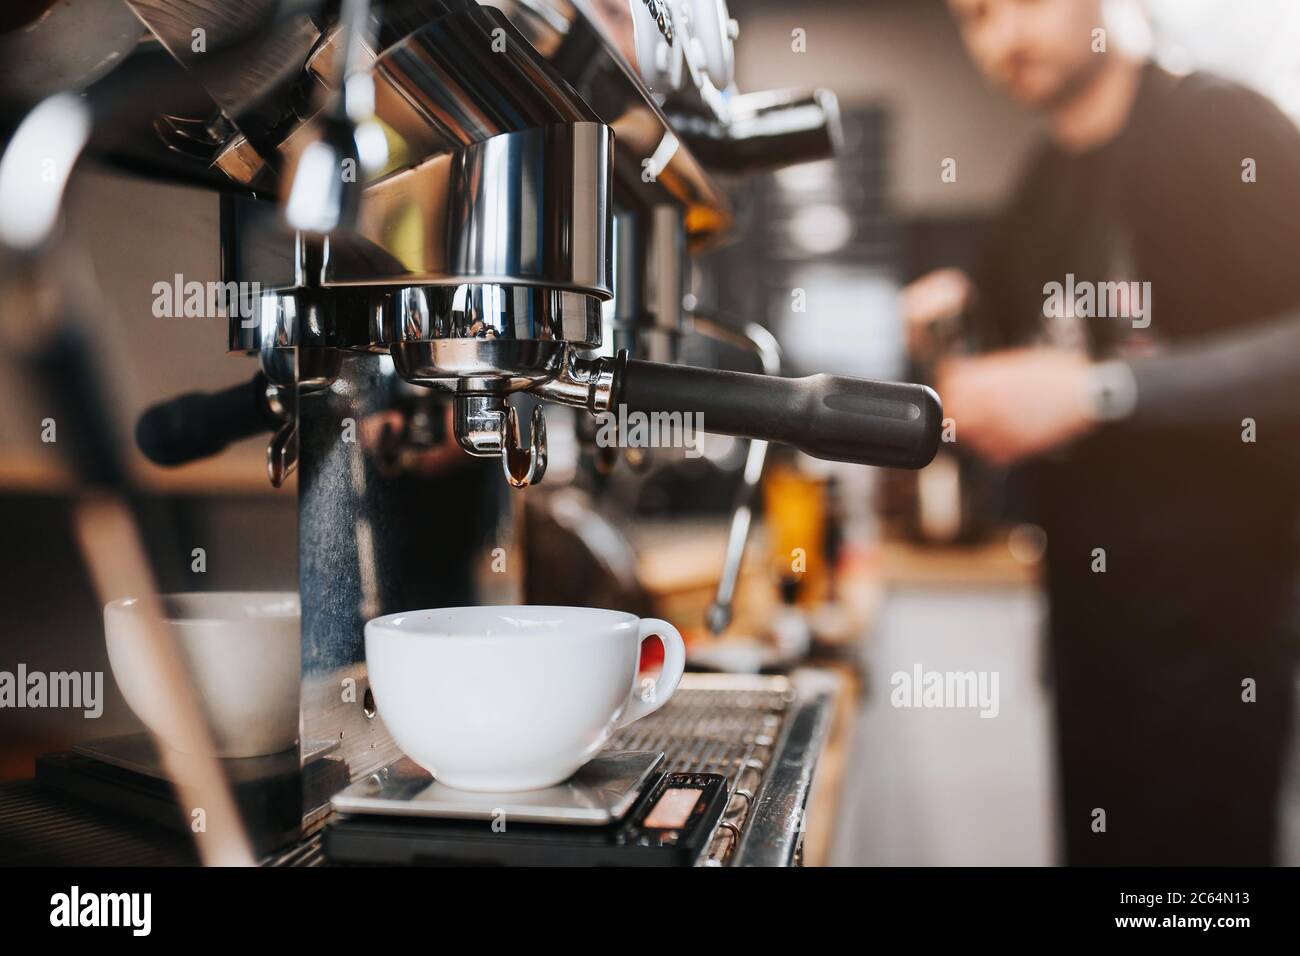 https://c8.alamy.com/comp/2C64N13/close-up-coffee-machine-with-a-white-cup-for-coffee-barista-in-the-background-in-defocus-cafe-and-bar-concept-2C64N13.jpg